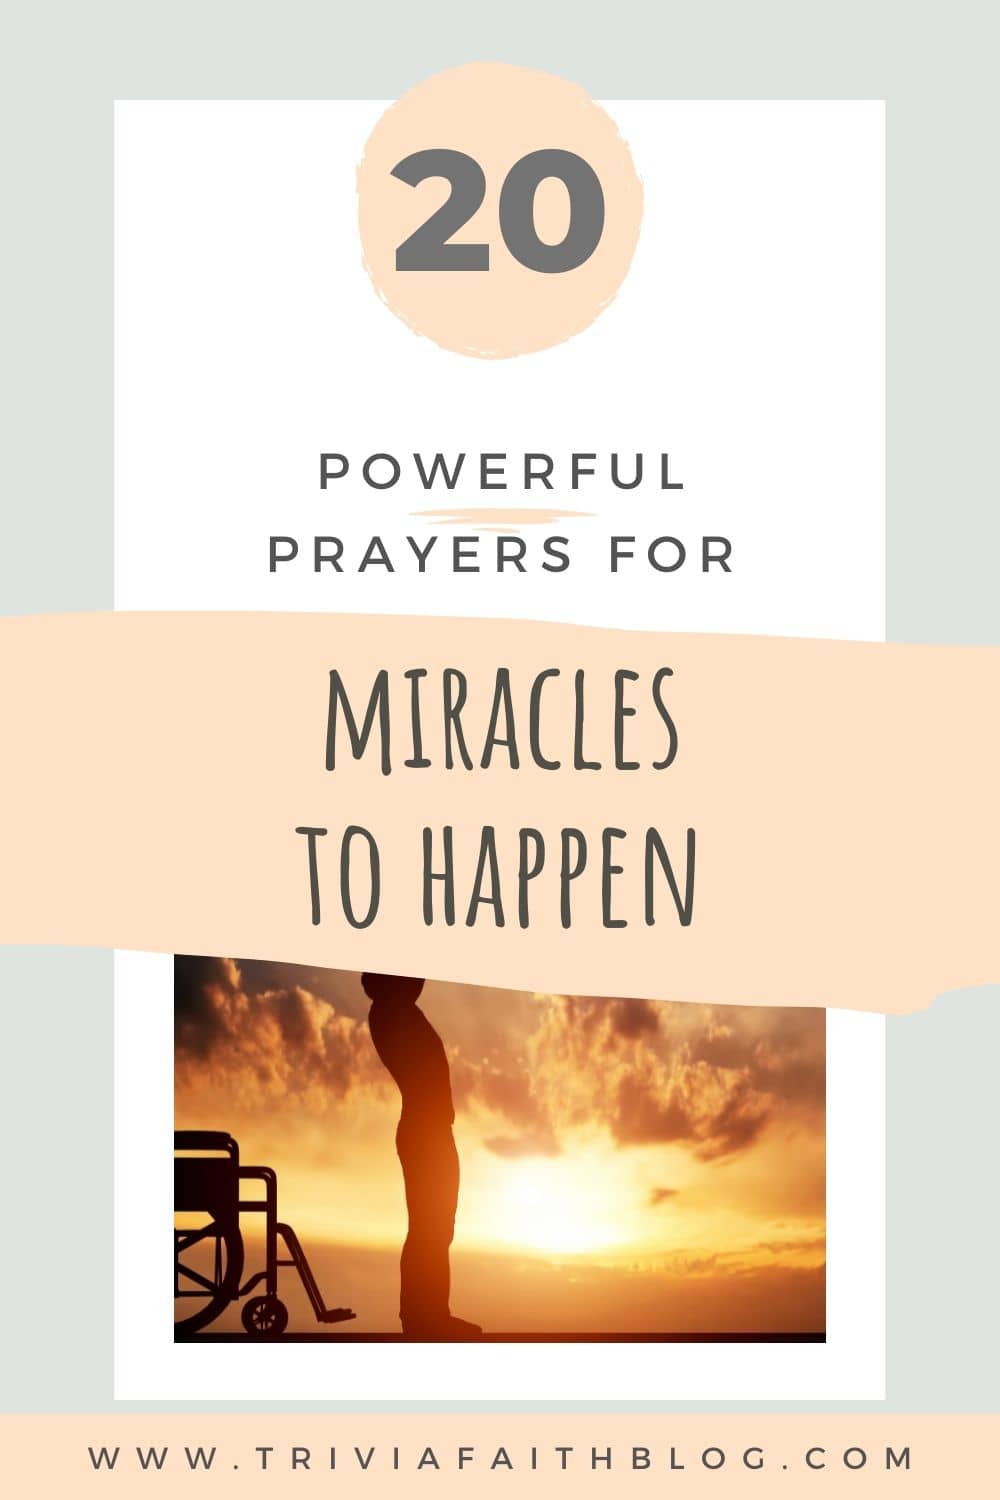 Powerful Prayers For Miracles to Happen